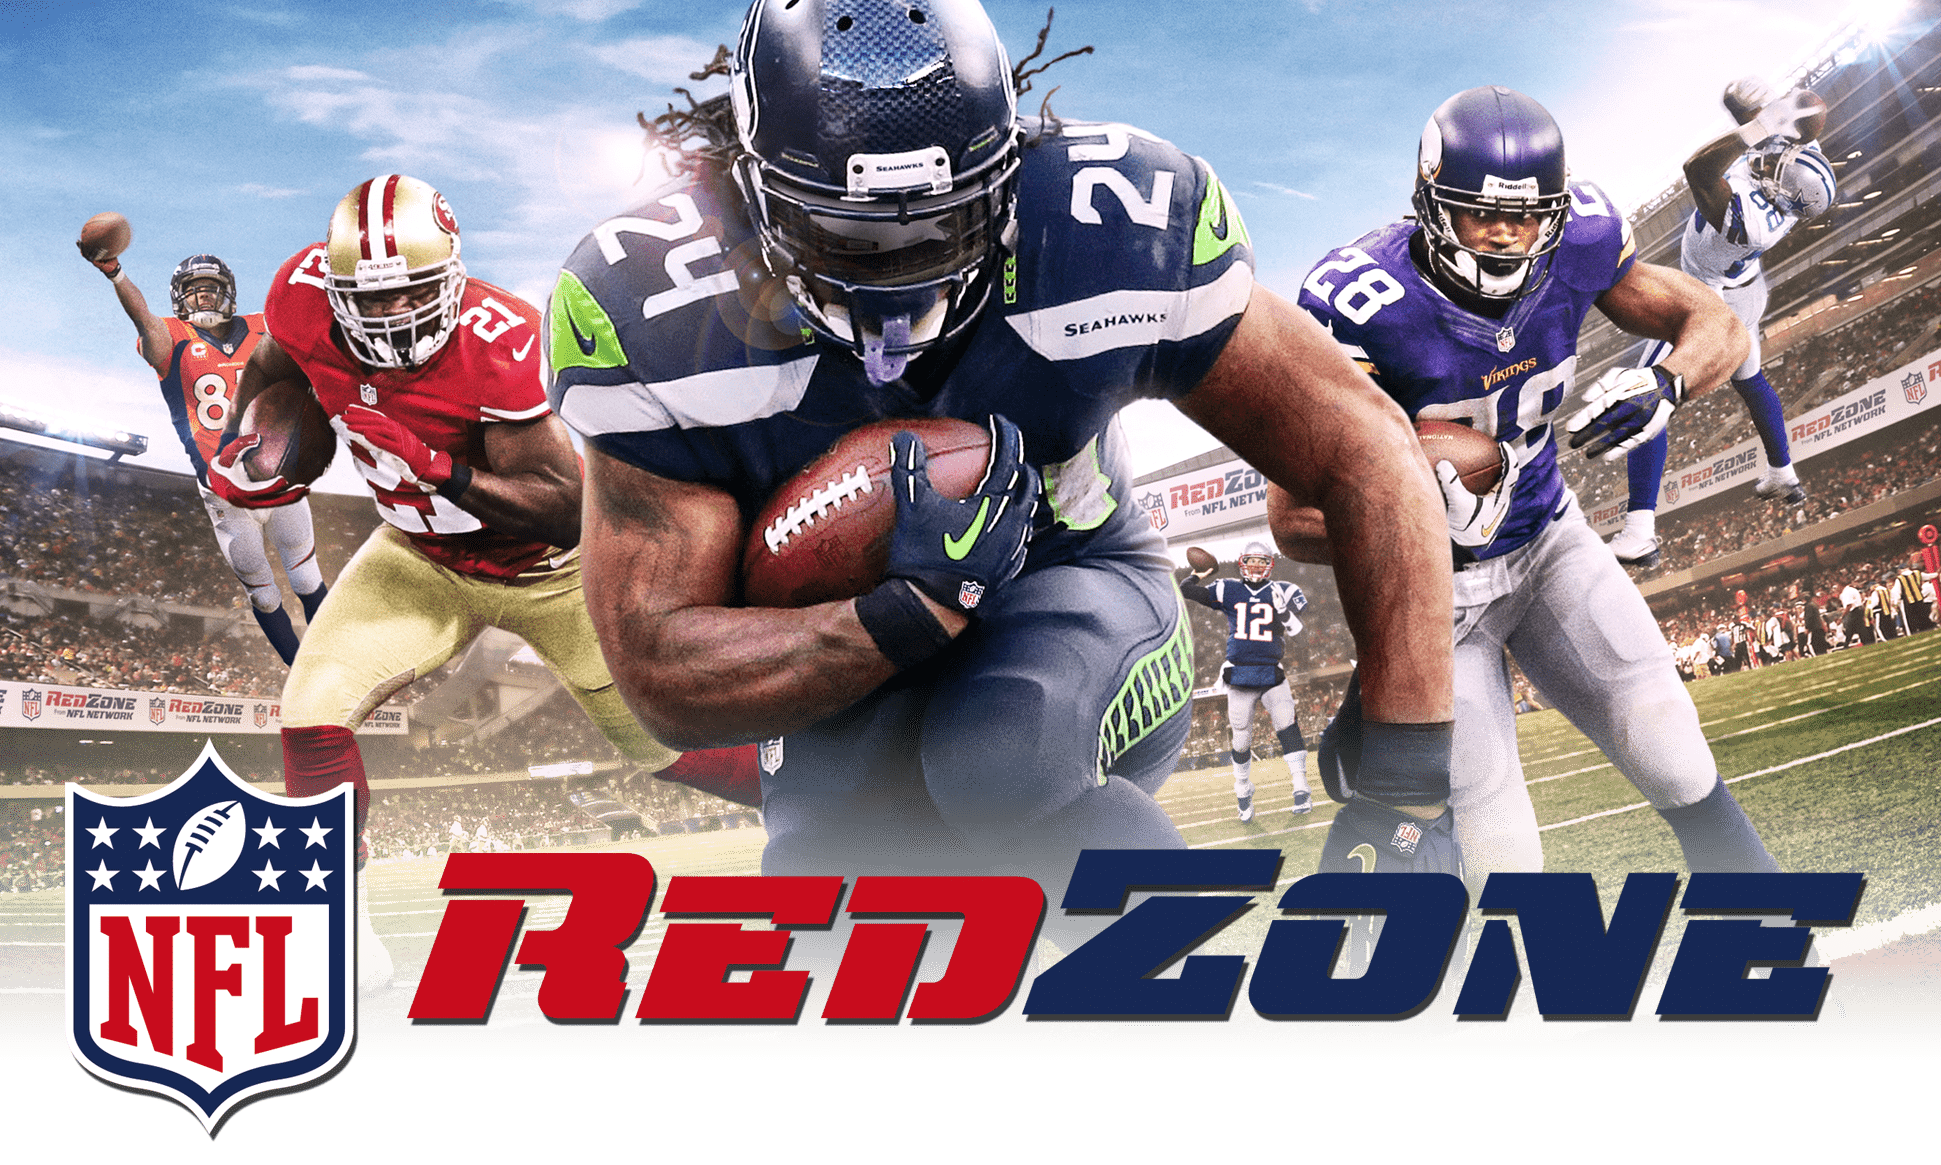 NFL Redzone Without Cable: Every Price & Streaming Plan to Watch